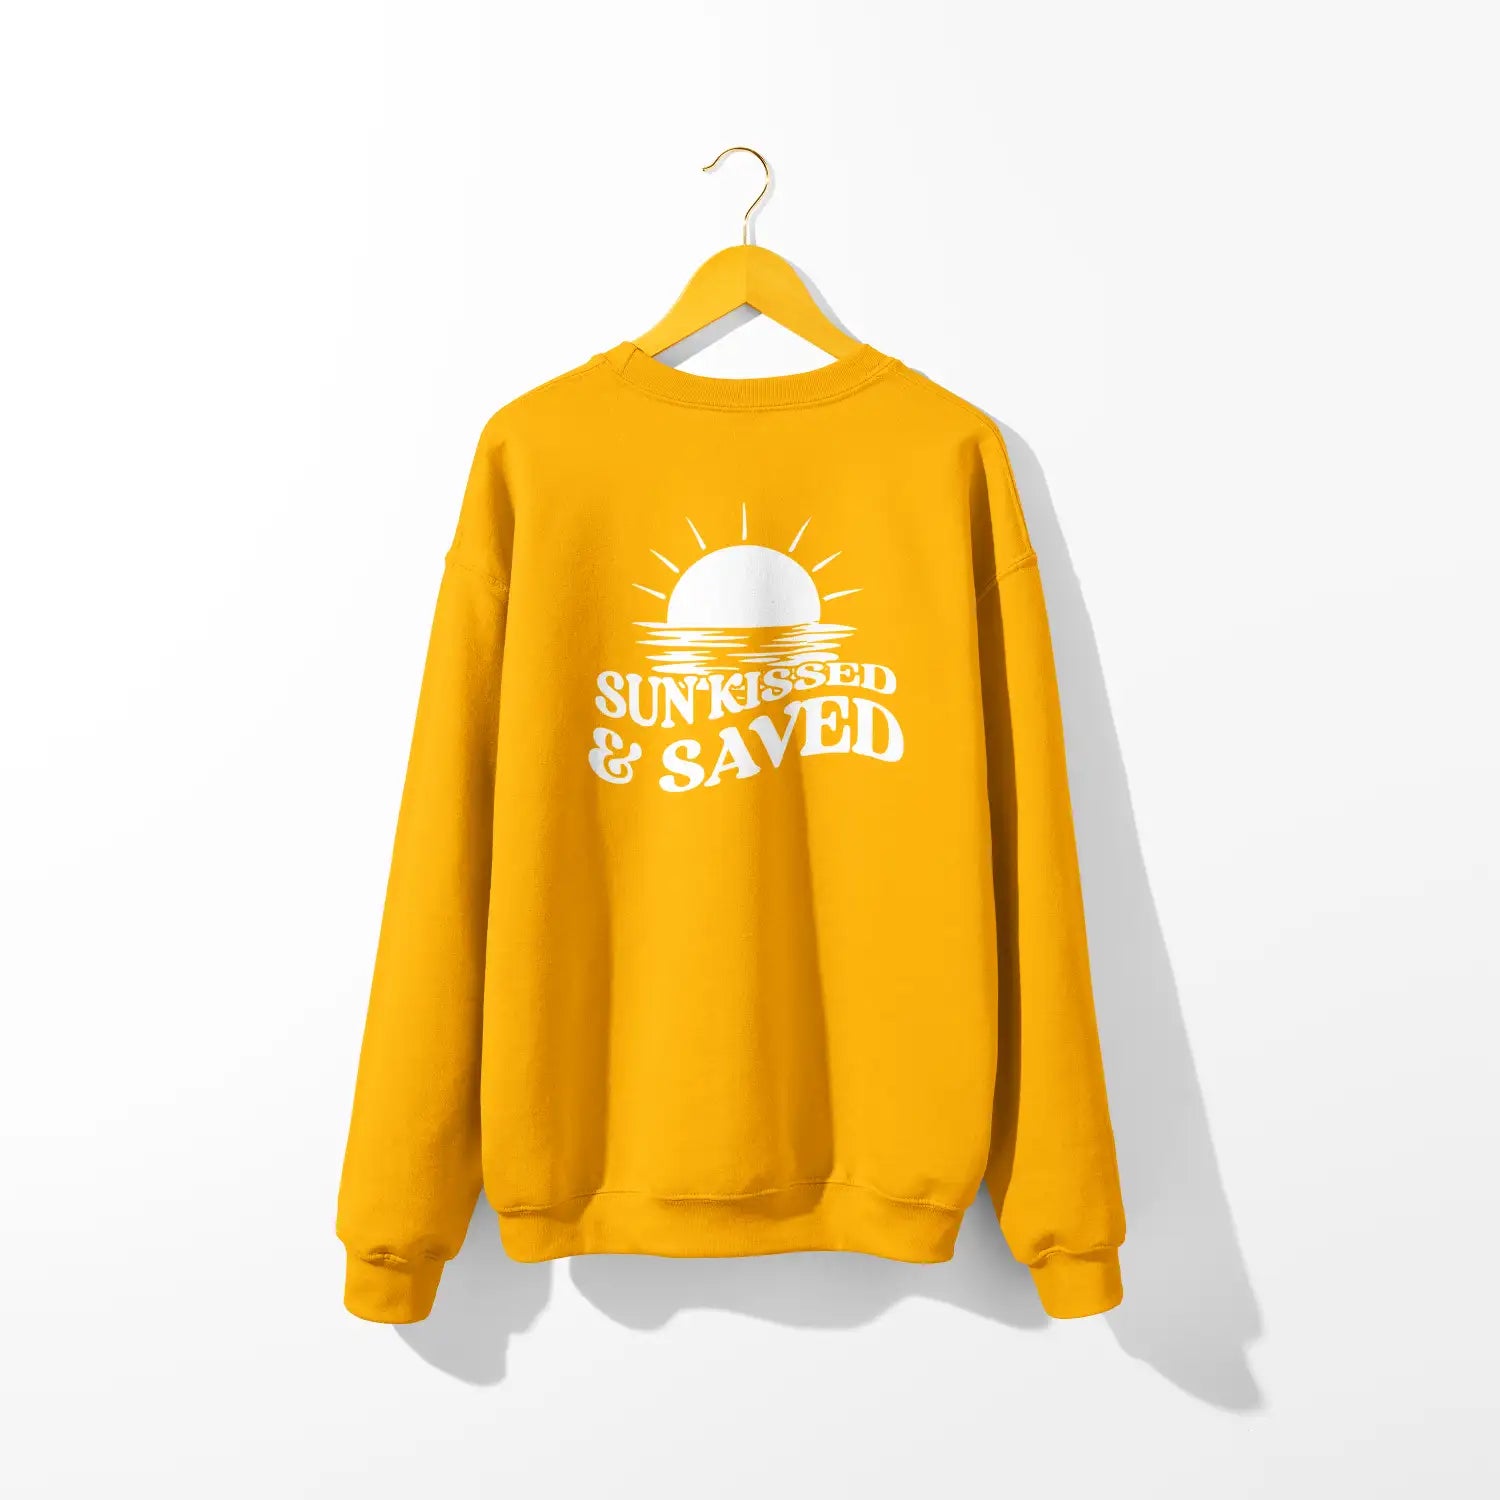 A yellow Sunkissed & Saved Sweatshirt from the brand Be Still and Know, with the word 'sun' on it, representing faith.